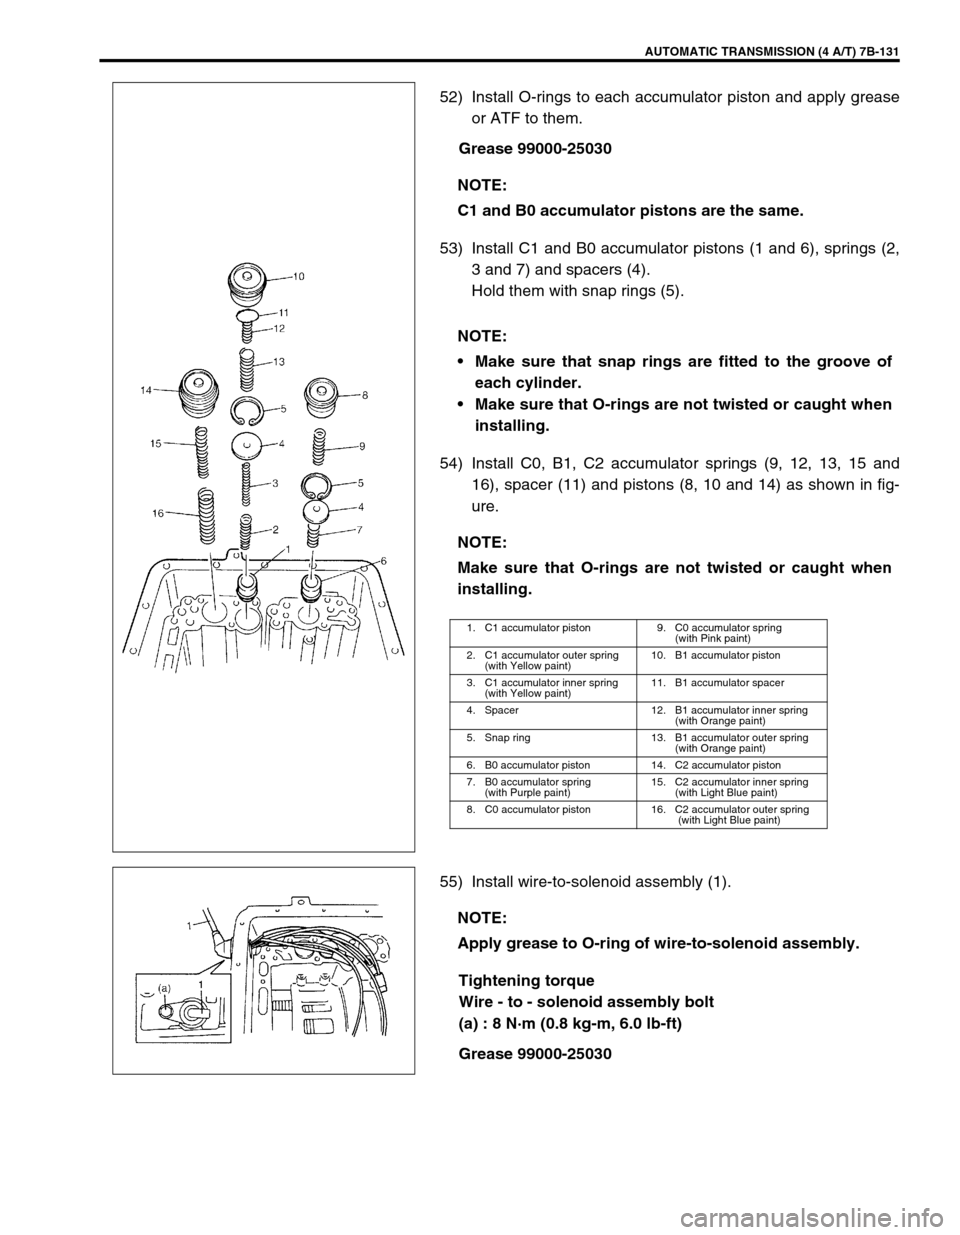 SUZUKI SWIFT 2000 1.G Transmission Service Workshop Manual AUTOMATIC TRANSMISSION (4 A/T) 7B-131
52) Install O-rings to each accumulator piston and apply grease
or ATF to them.
Grease 99000-25030
53) Install C1 and B0 accumulator pistons (1 and 6), springs (2